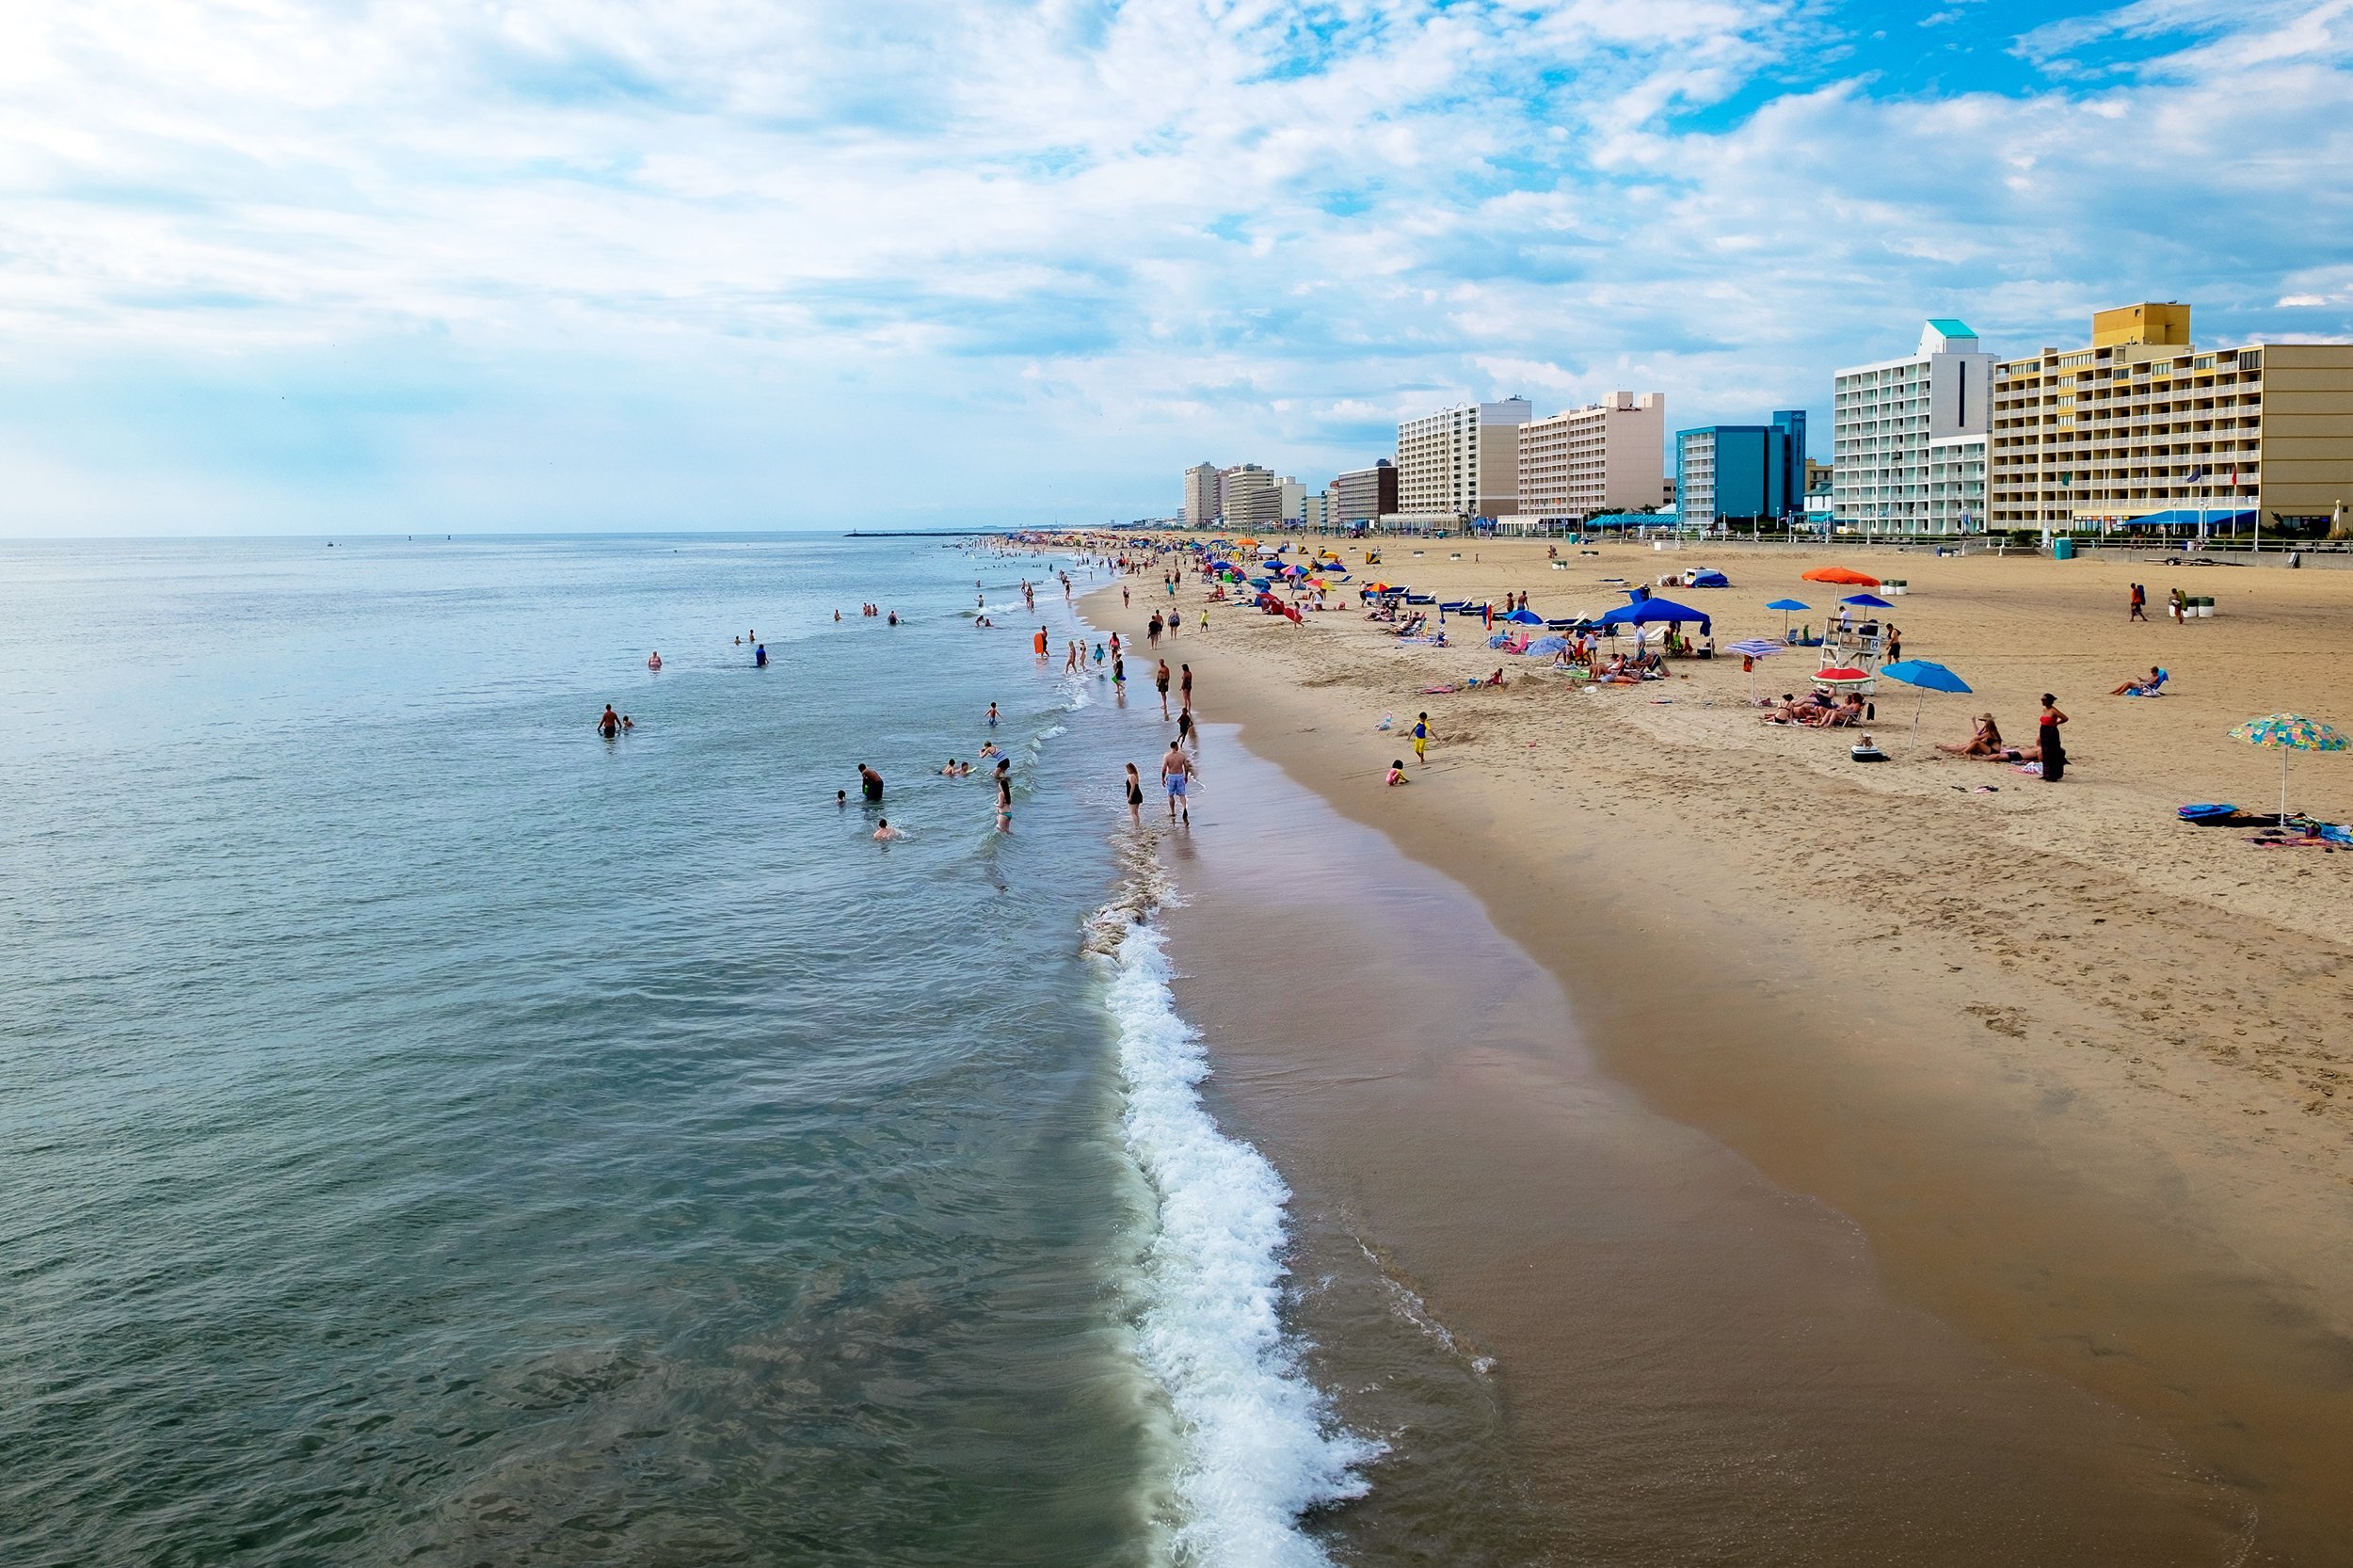 <p>Virginia Beach's oceanfront lifestyle is in full swing from May through September, meaning the city, beaches, and 3-mile boardwalk are overrun. Consider saving this destination for April or early May.</p>